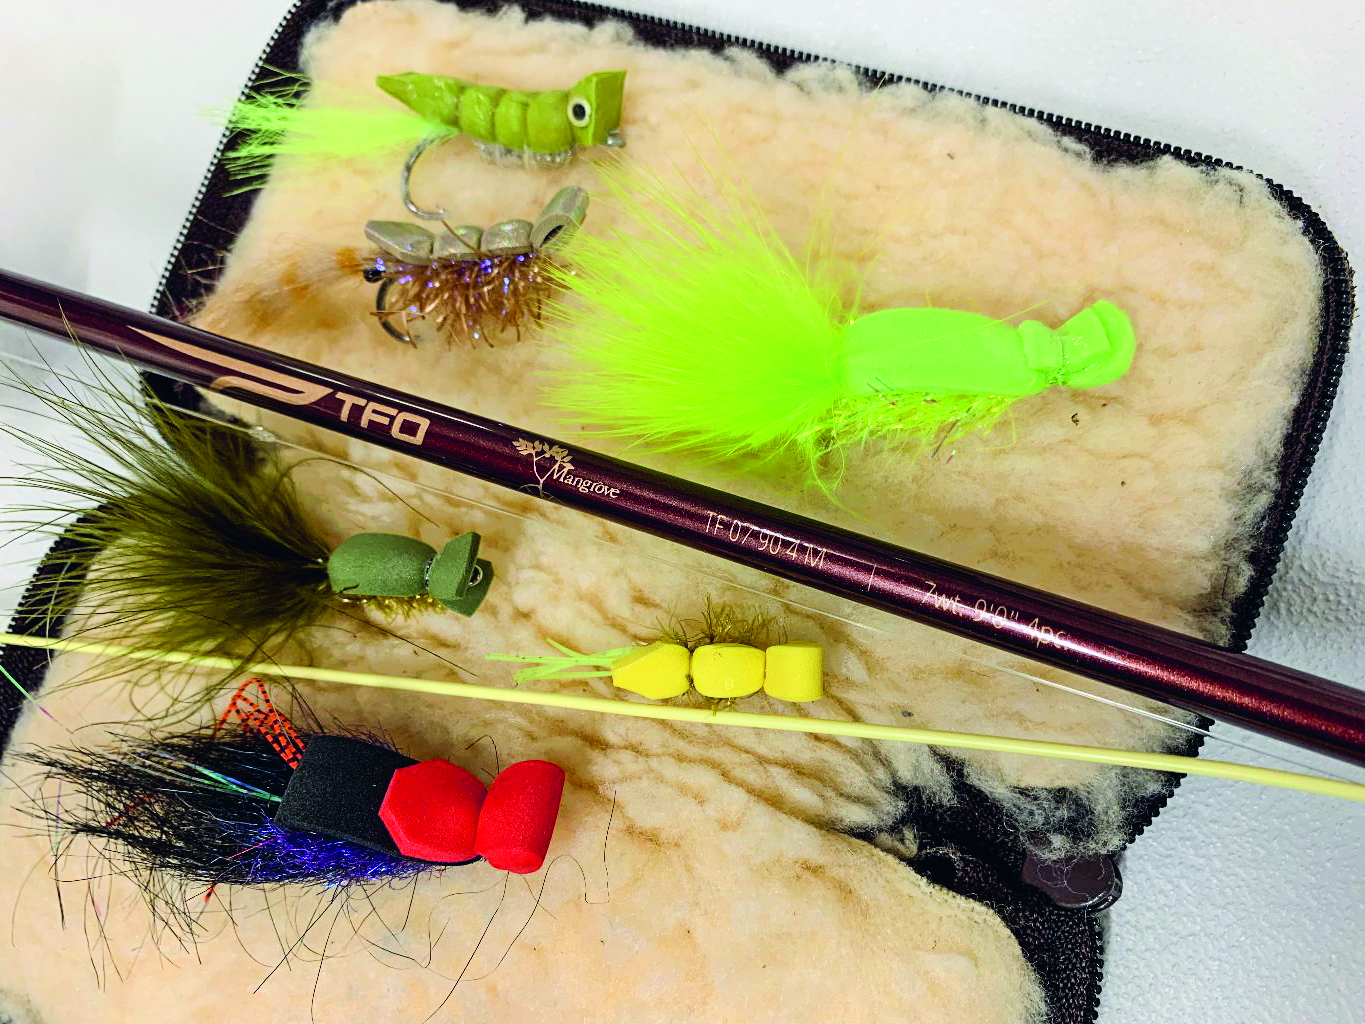 The FlyTier – why should every fly tyer have them? -blog Renomed